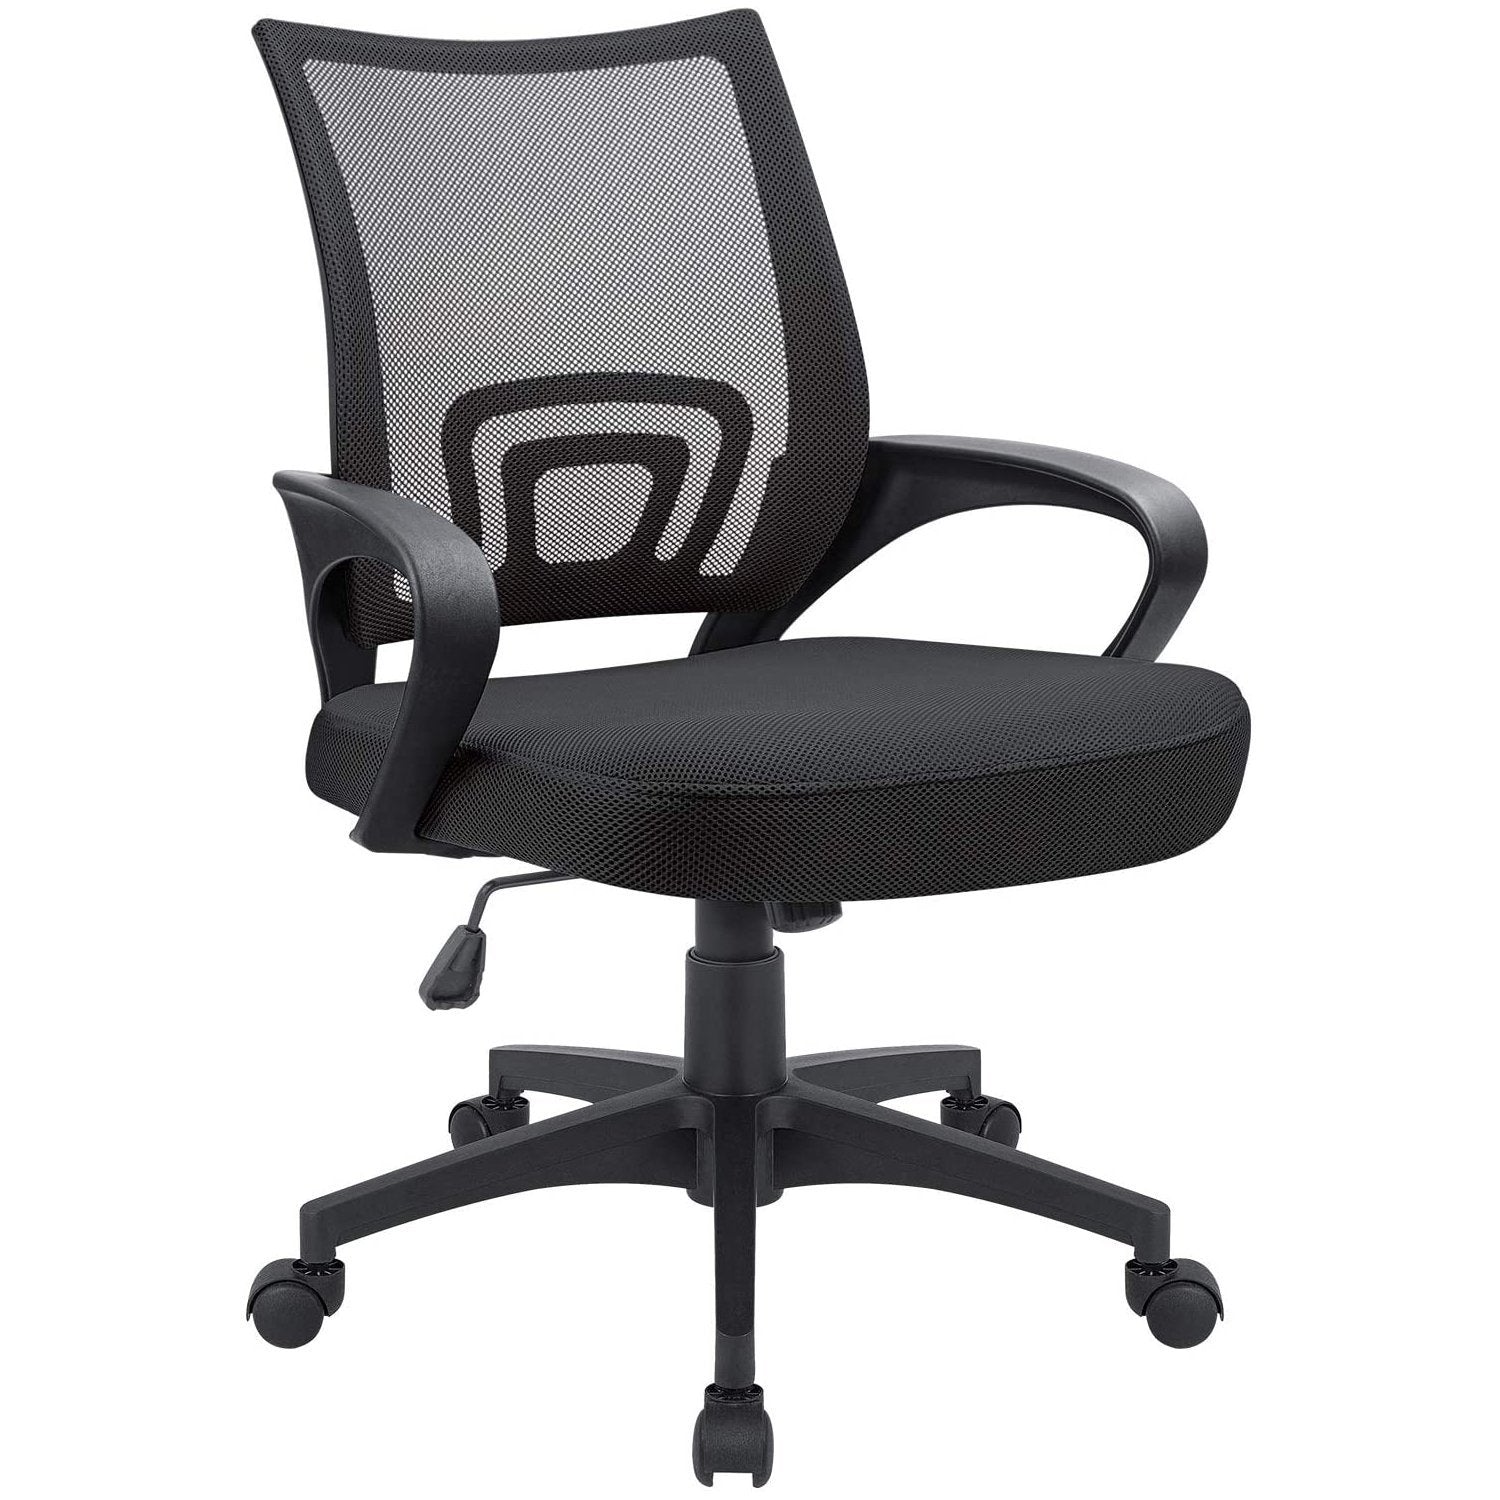 Details about   Office Chair Mid-Back Height Adjustable Ergonomic Mesh Swivel Computer Chair 